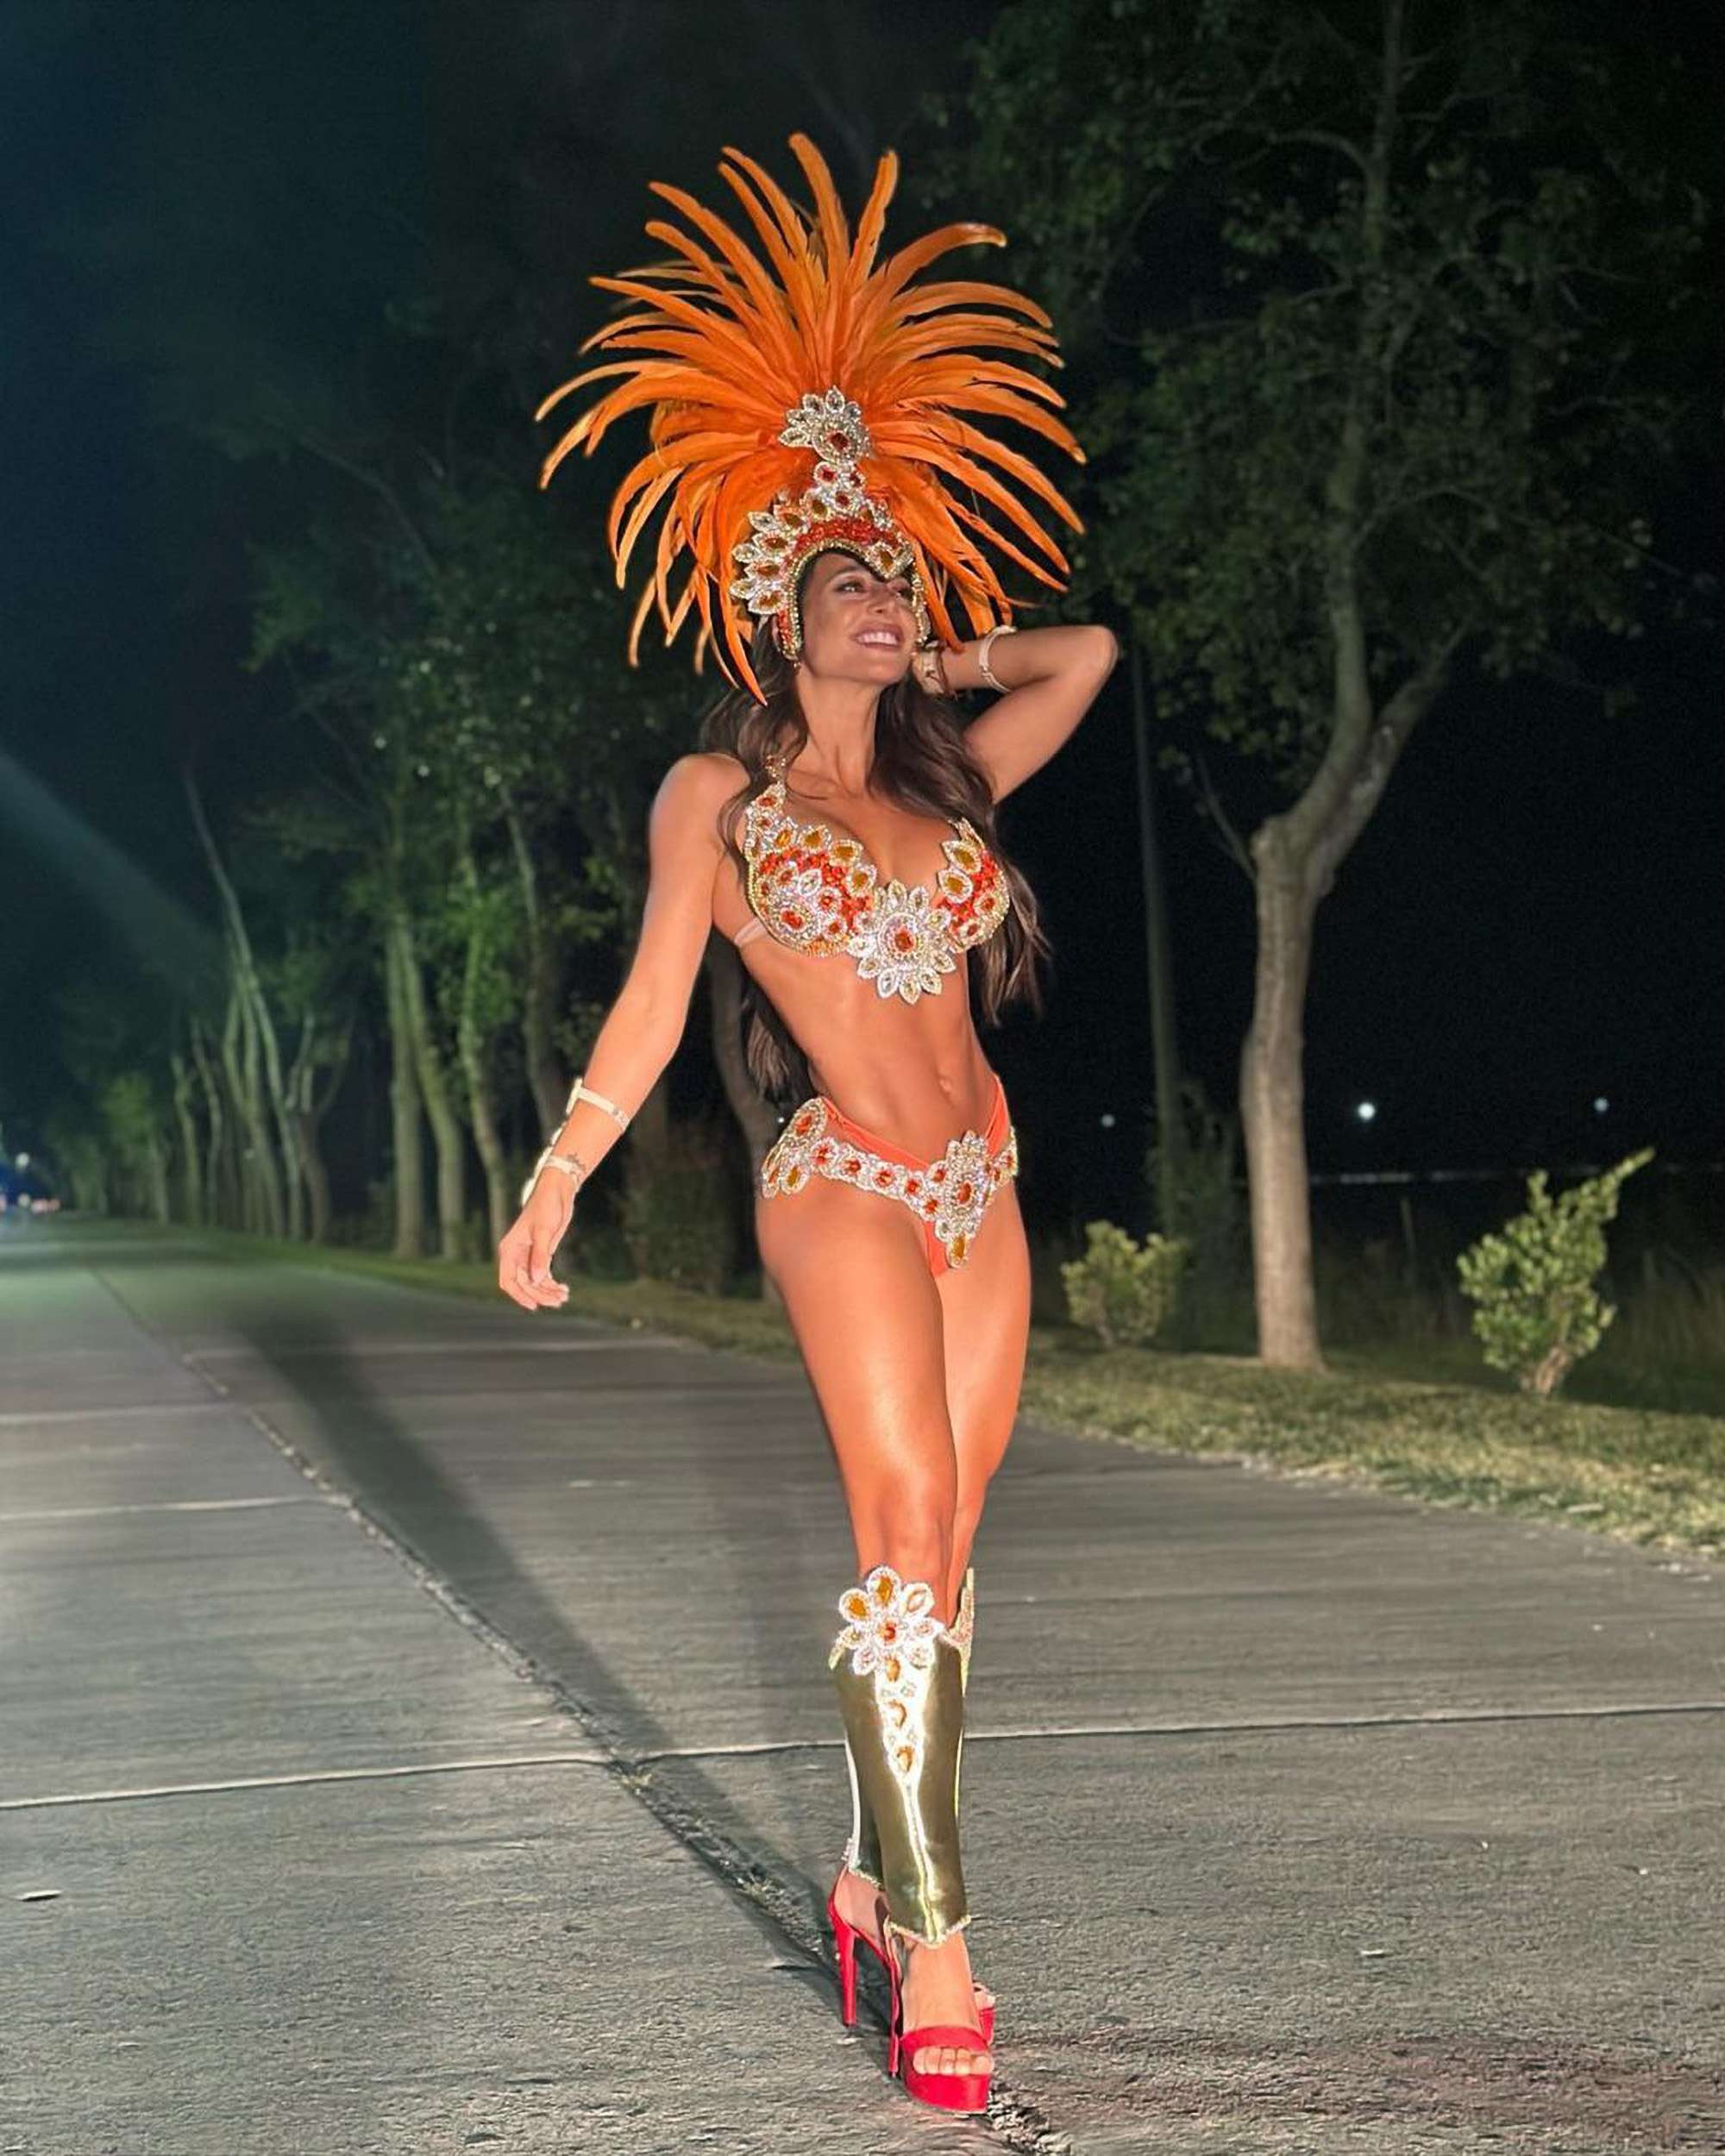 Read more about the article Argentine Weather Girl Wows Fans After Posing In Sexy Orange Carnival Outfit